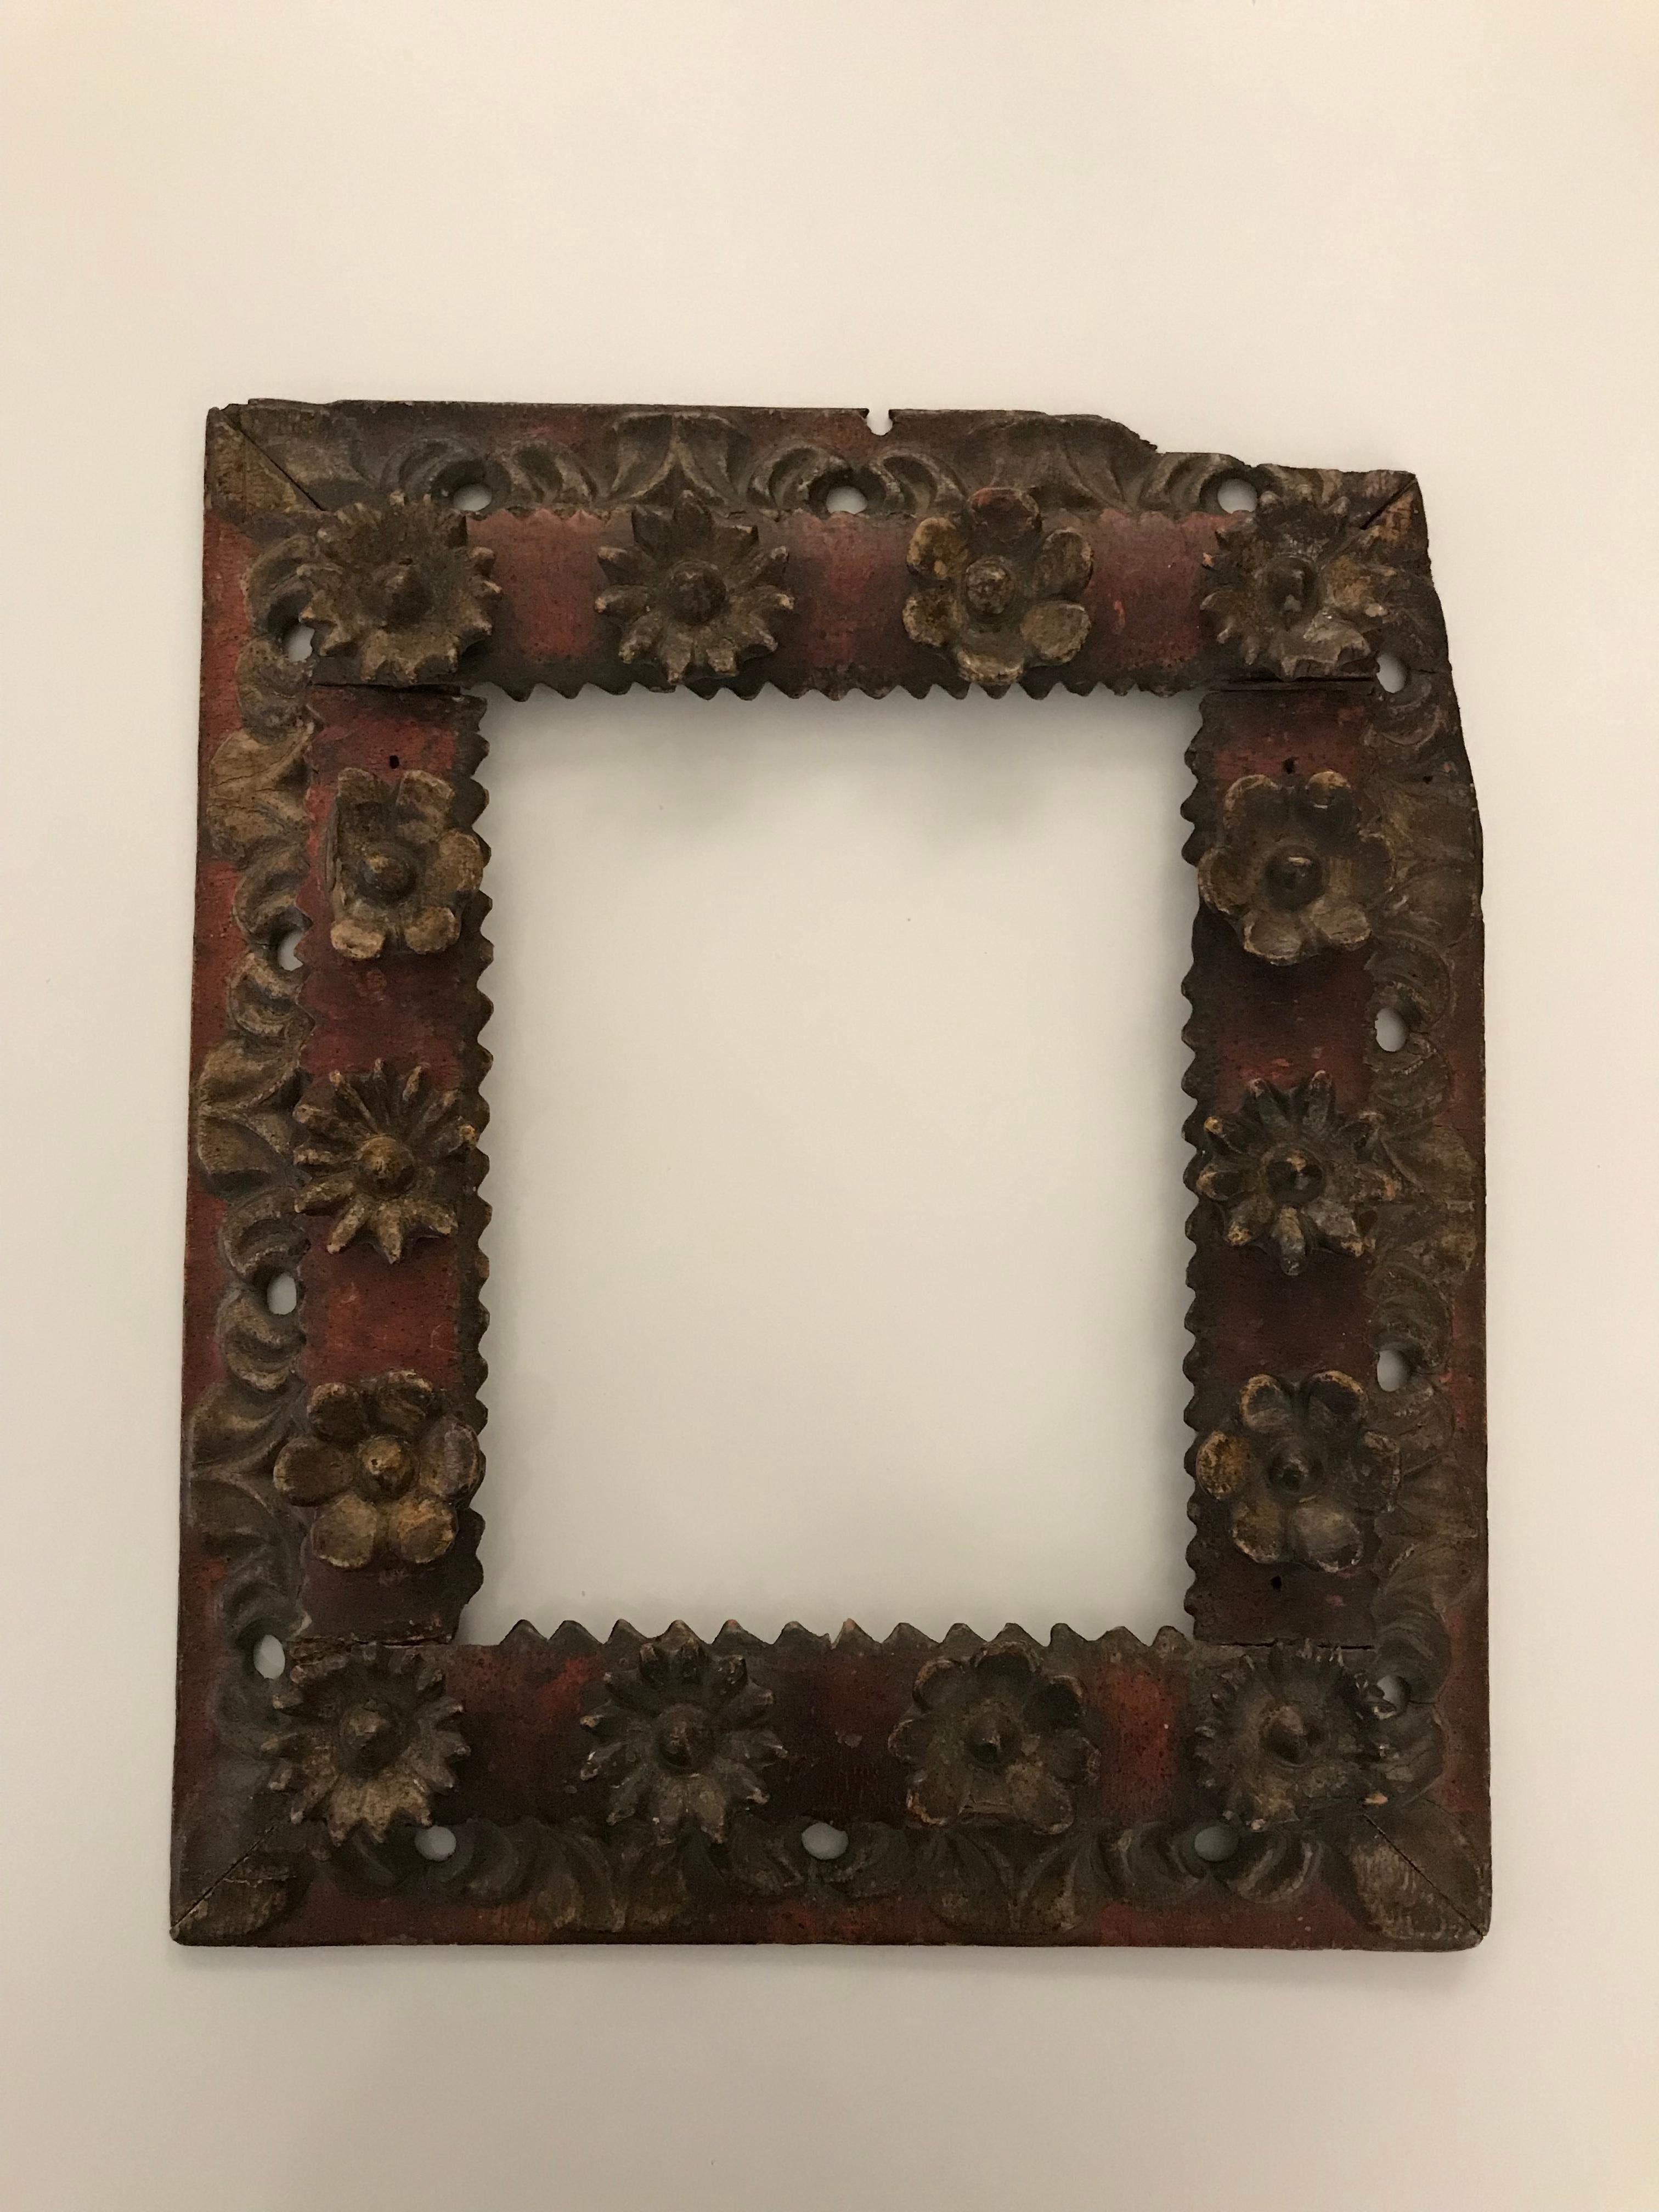 Original 18th century hand carved painted and applied ornament picture frame; continuous carved floral motif.